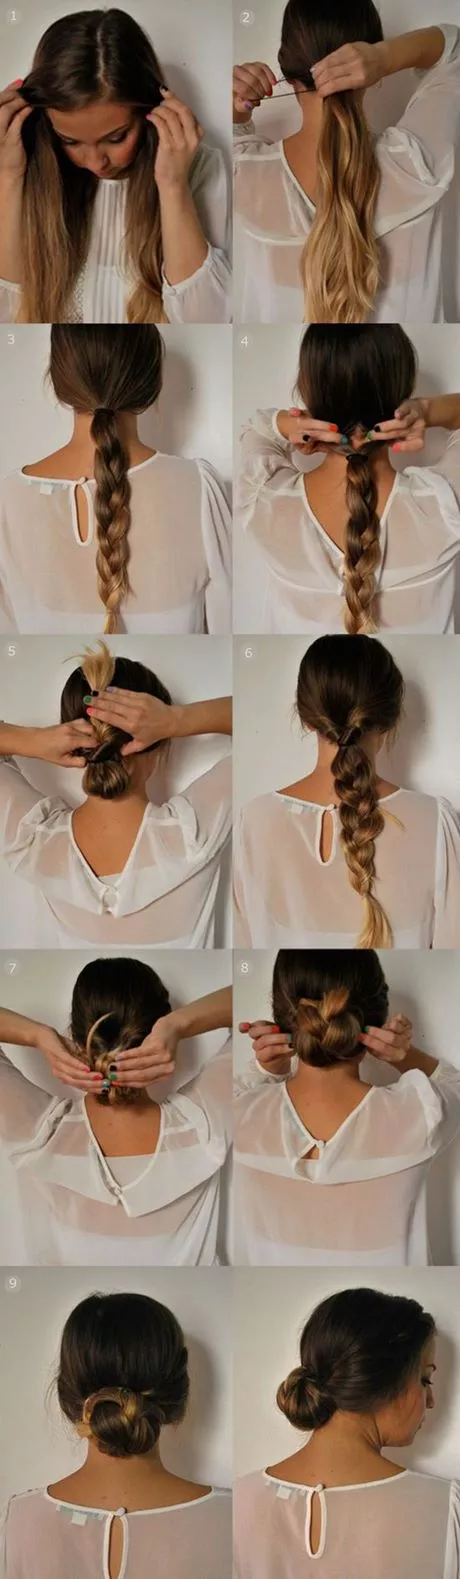 Simple but cool hairstyles simple-but-cool-hairstyles-70_18-10-10